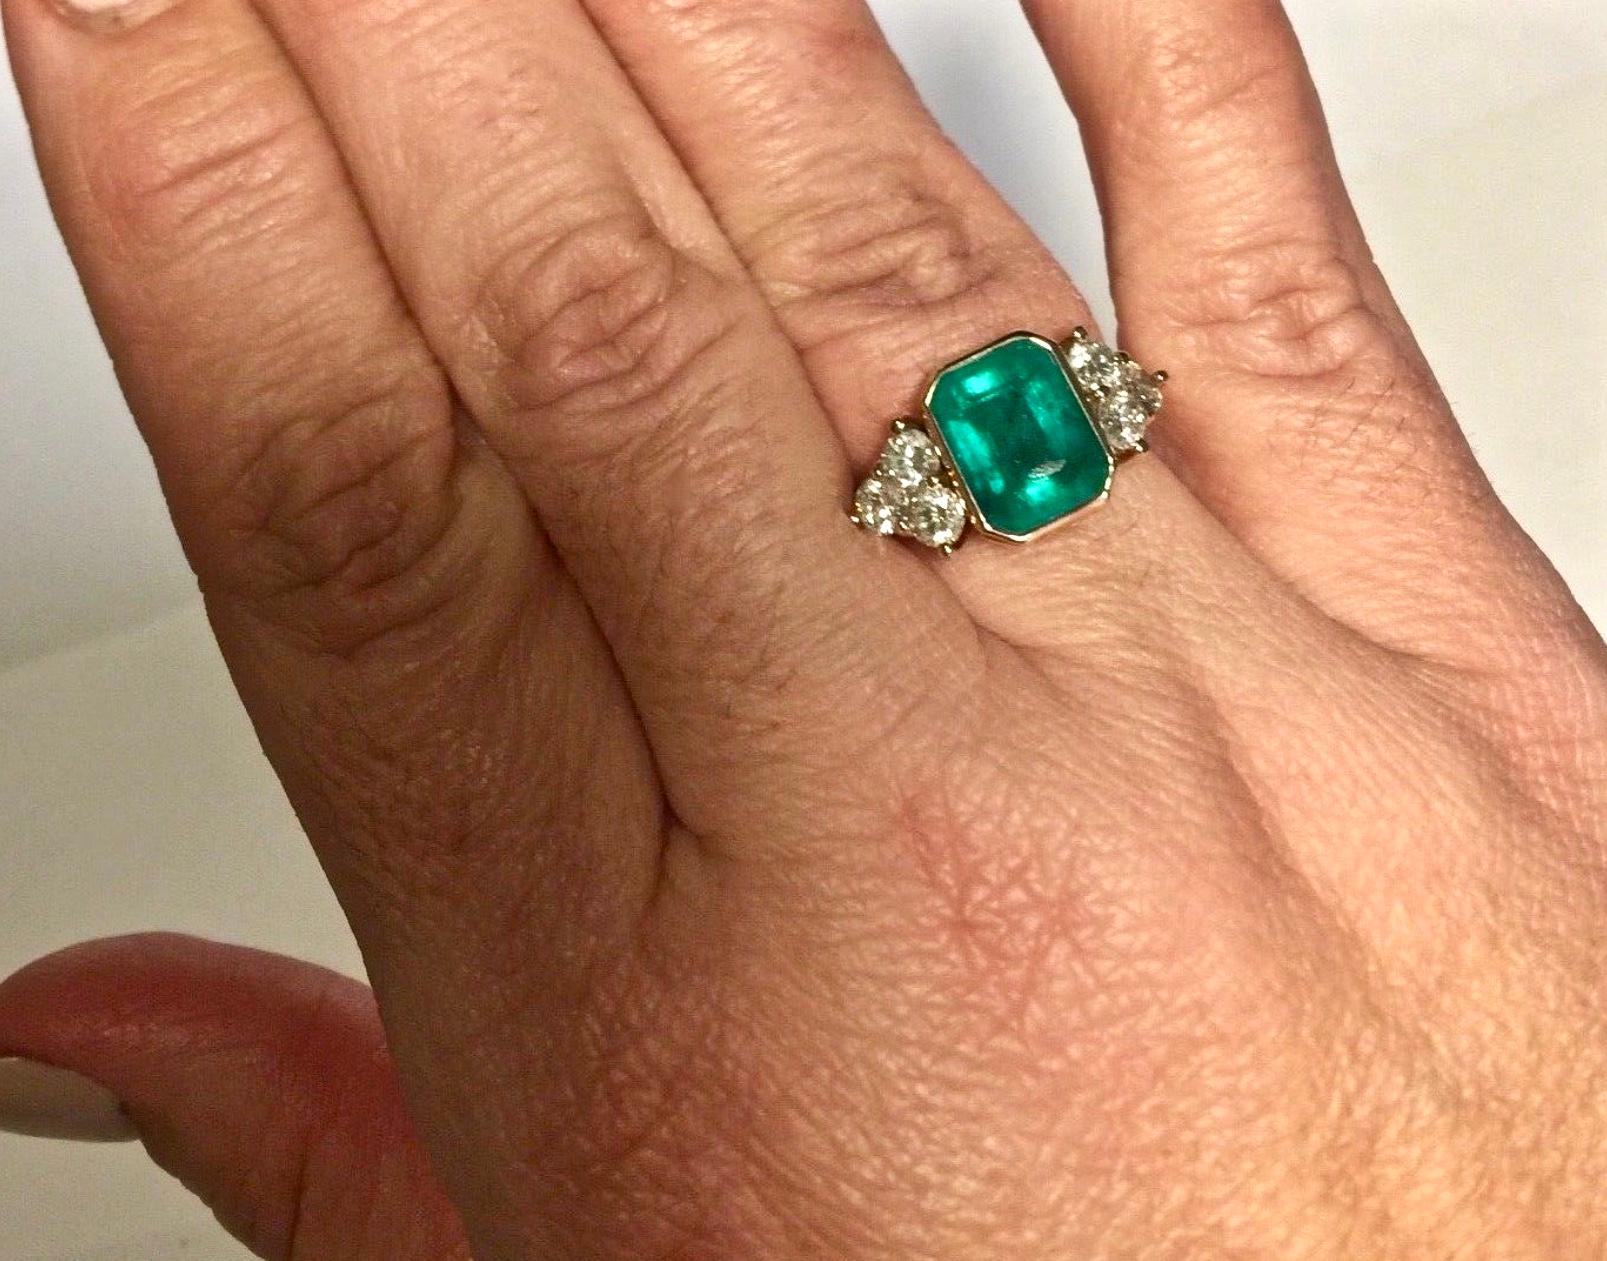 5.7 Carat Natural Colombian Emerald Diamond Engagement Ring 18K
The fine natural Colombian emerald cut weight 4.50 carats emerald cut, vivid medium green color fully saturated, very good clarity & transparency . The center emerald is adorned with